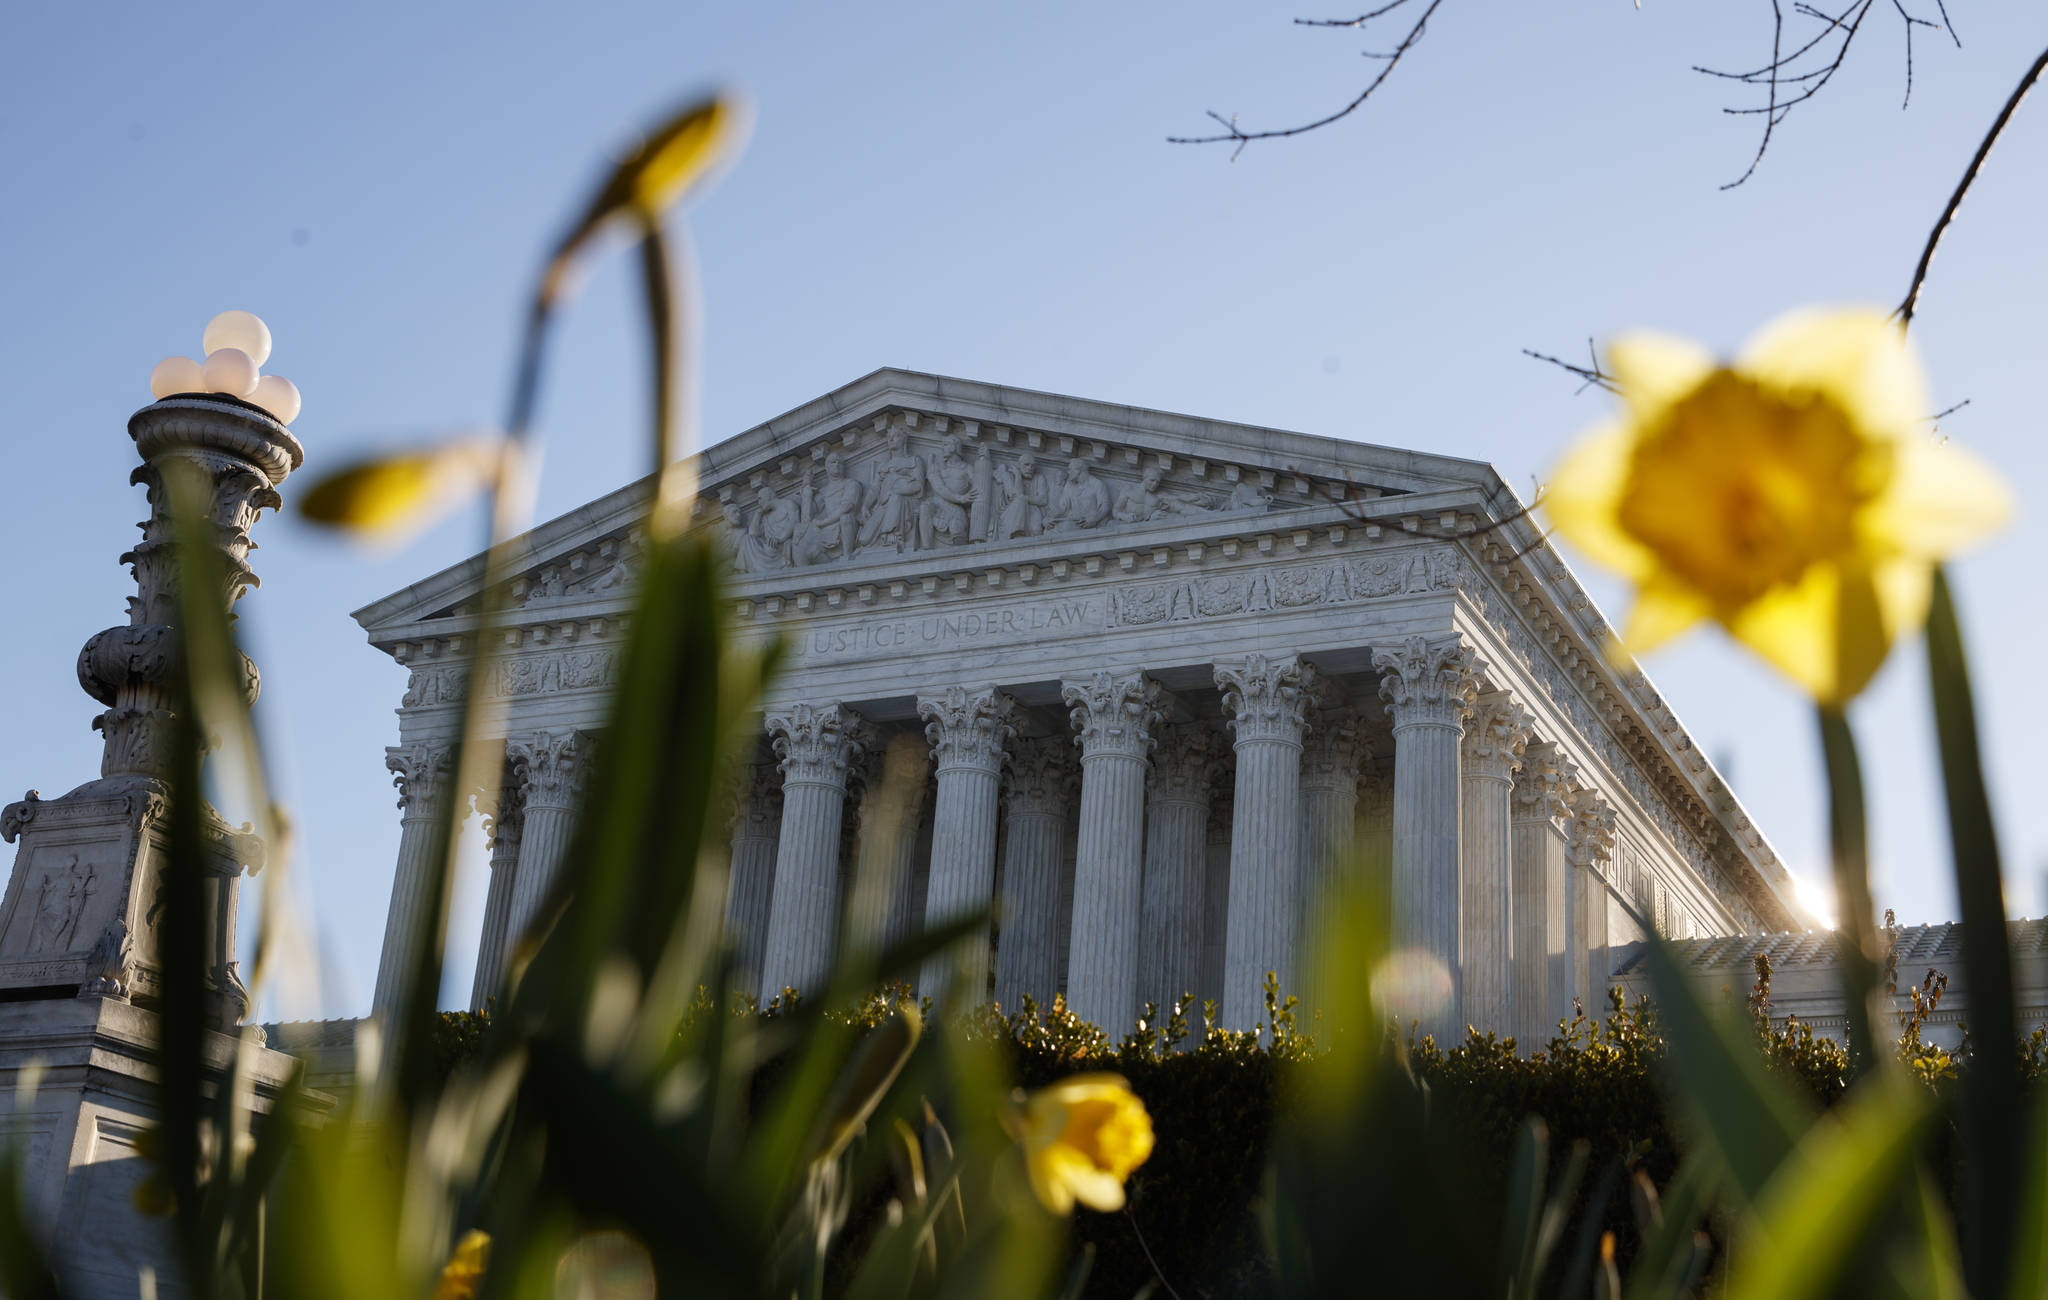 The Supreme Court building is seen on Capitol Hill in Washington, Tuesday. The Supreme Court is returning to arguments over whether the political task of redistricting can be overly partisan. (AP Photo/Carolyn Kaster)